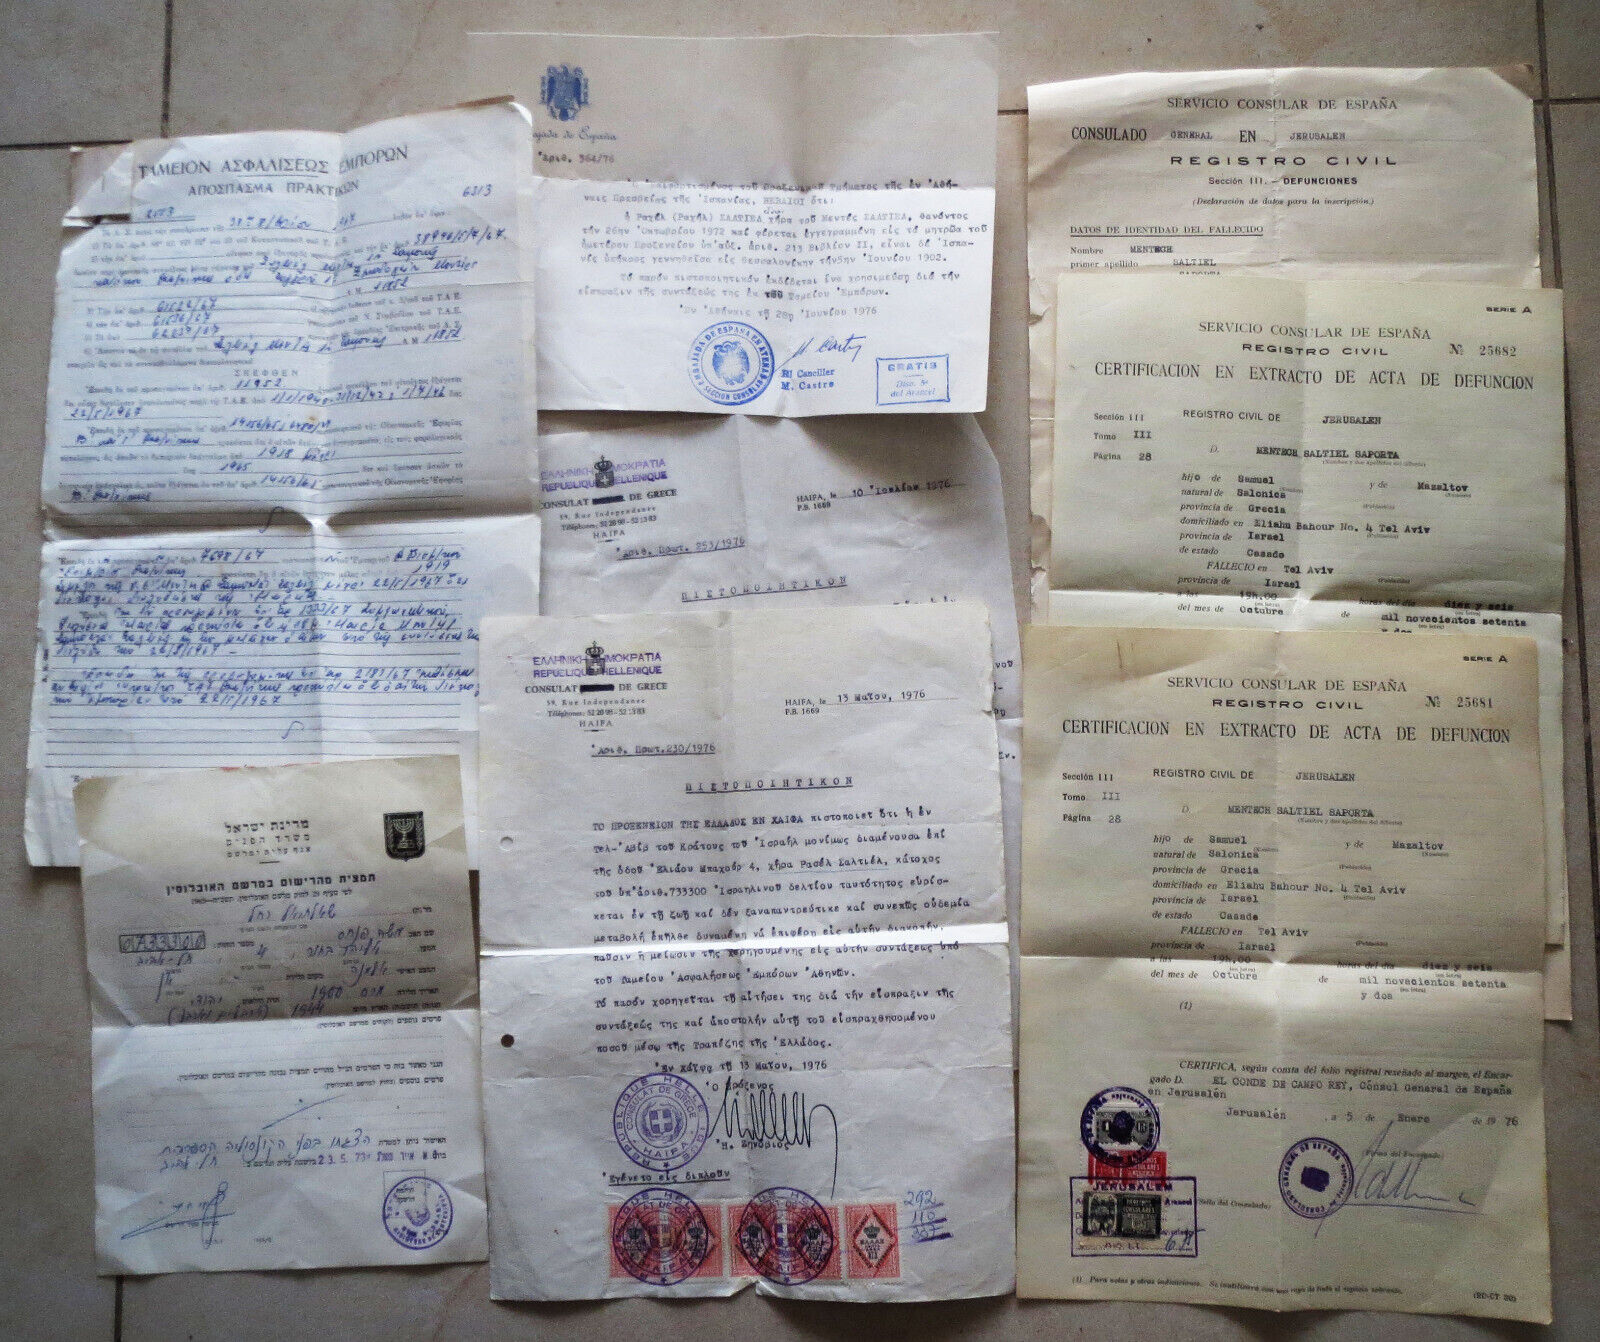 JUDAICA ISRAEL SPAIN GREECE CONSULAR DOCUMENTS & OTHERS JEWISH ARCHIVE 1960-70s